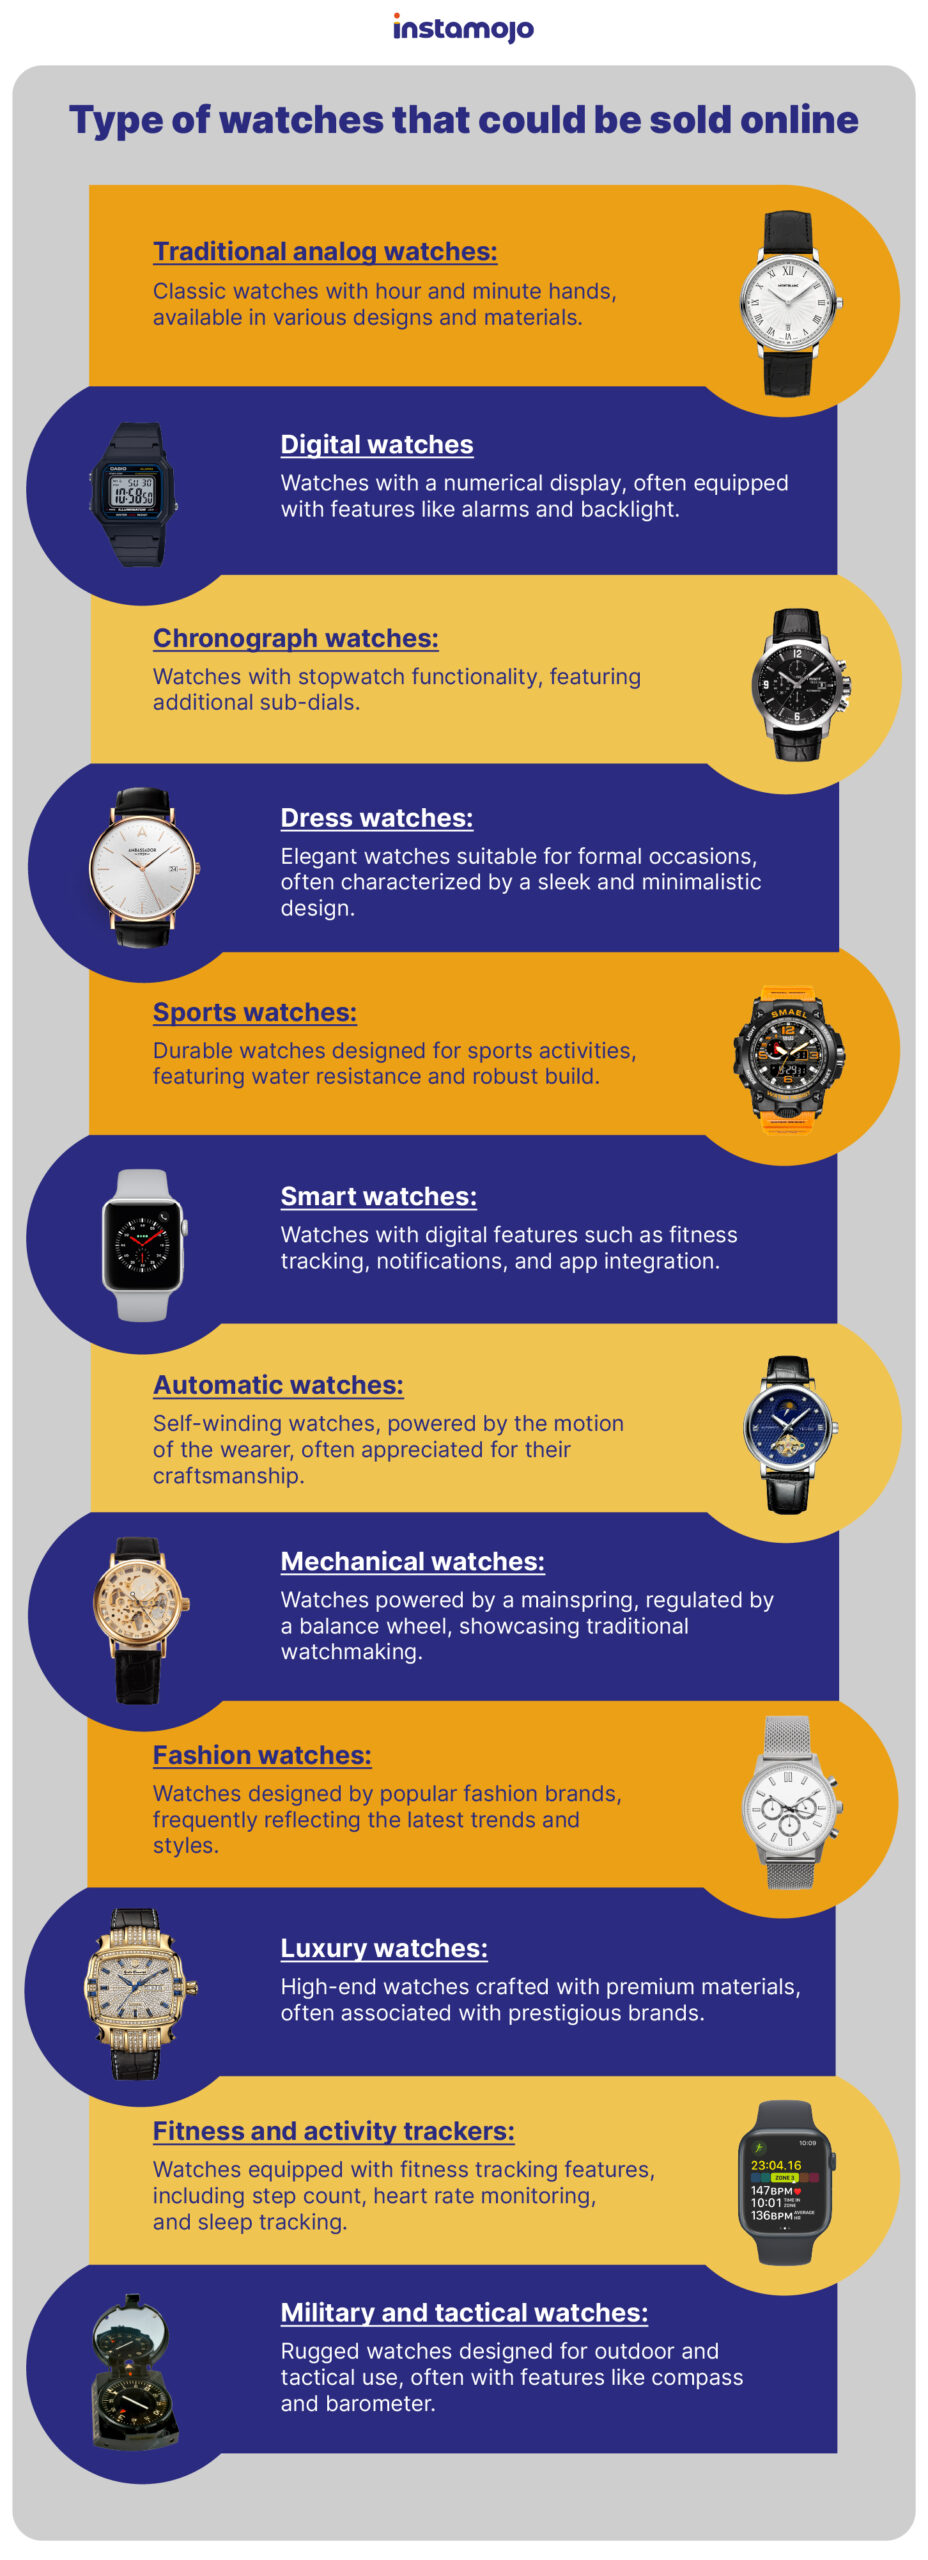 Type of watches you can sell online